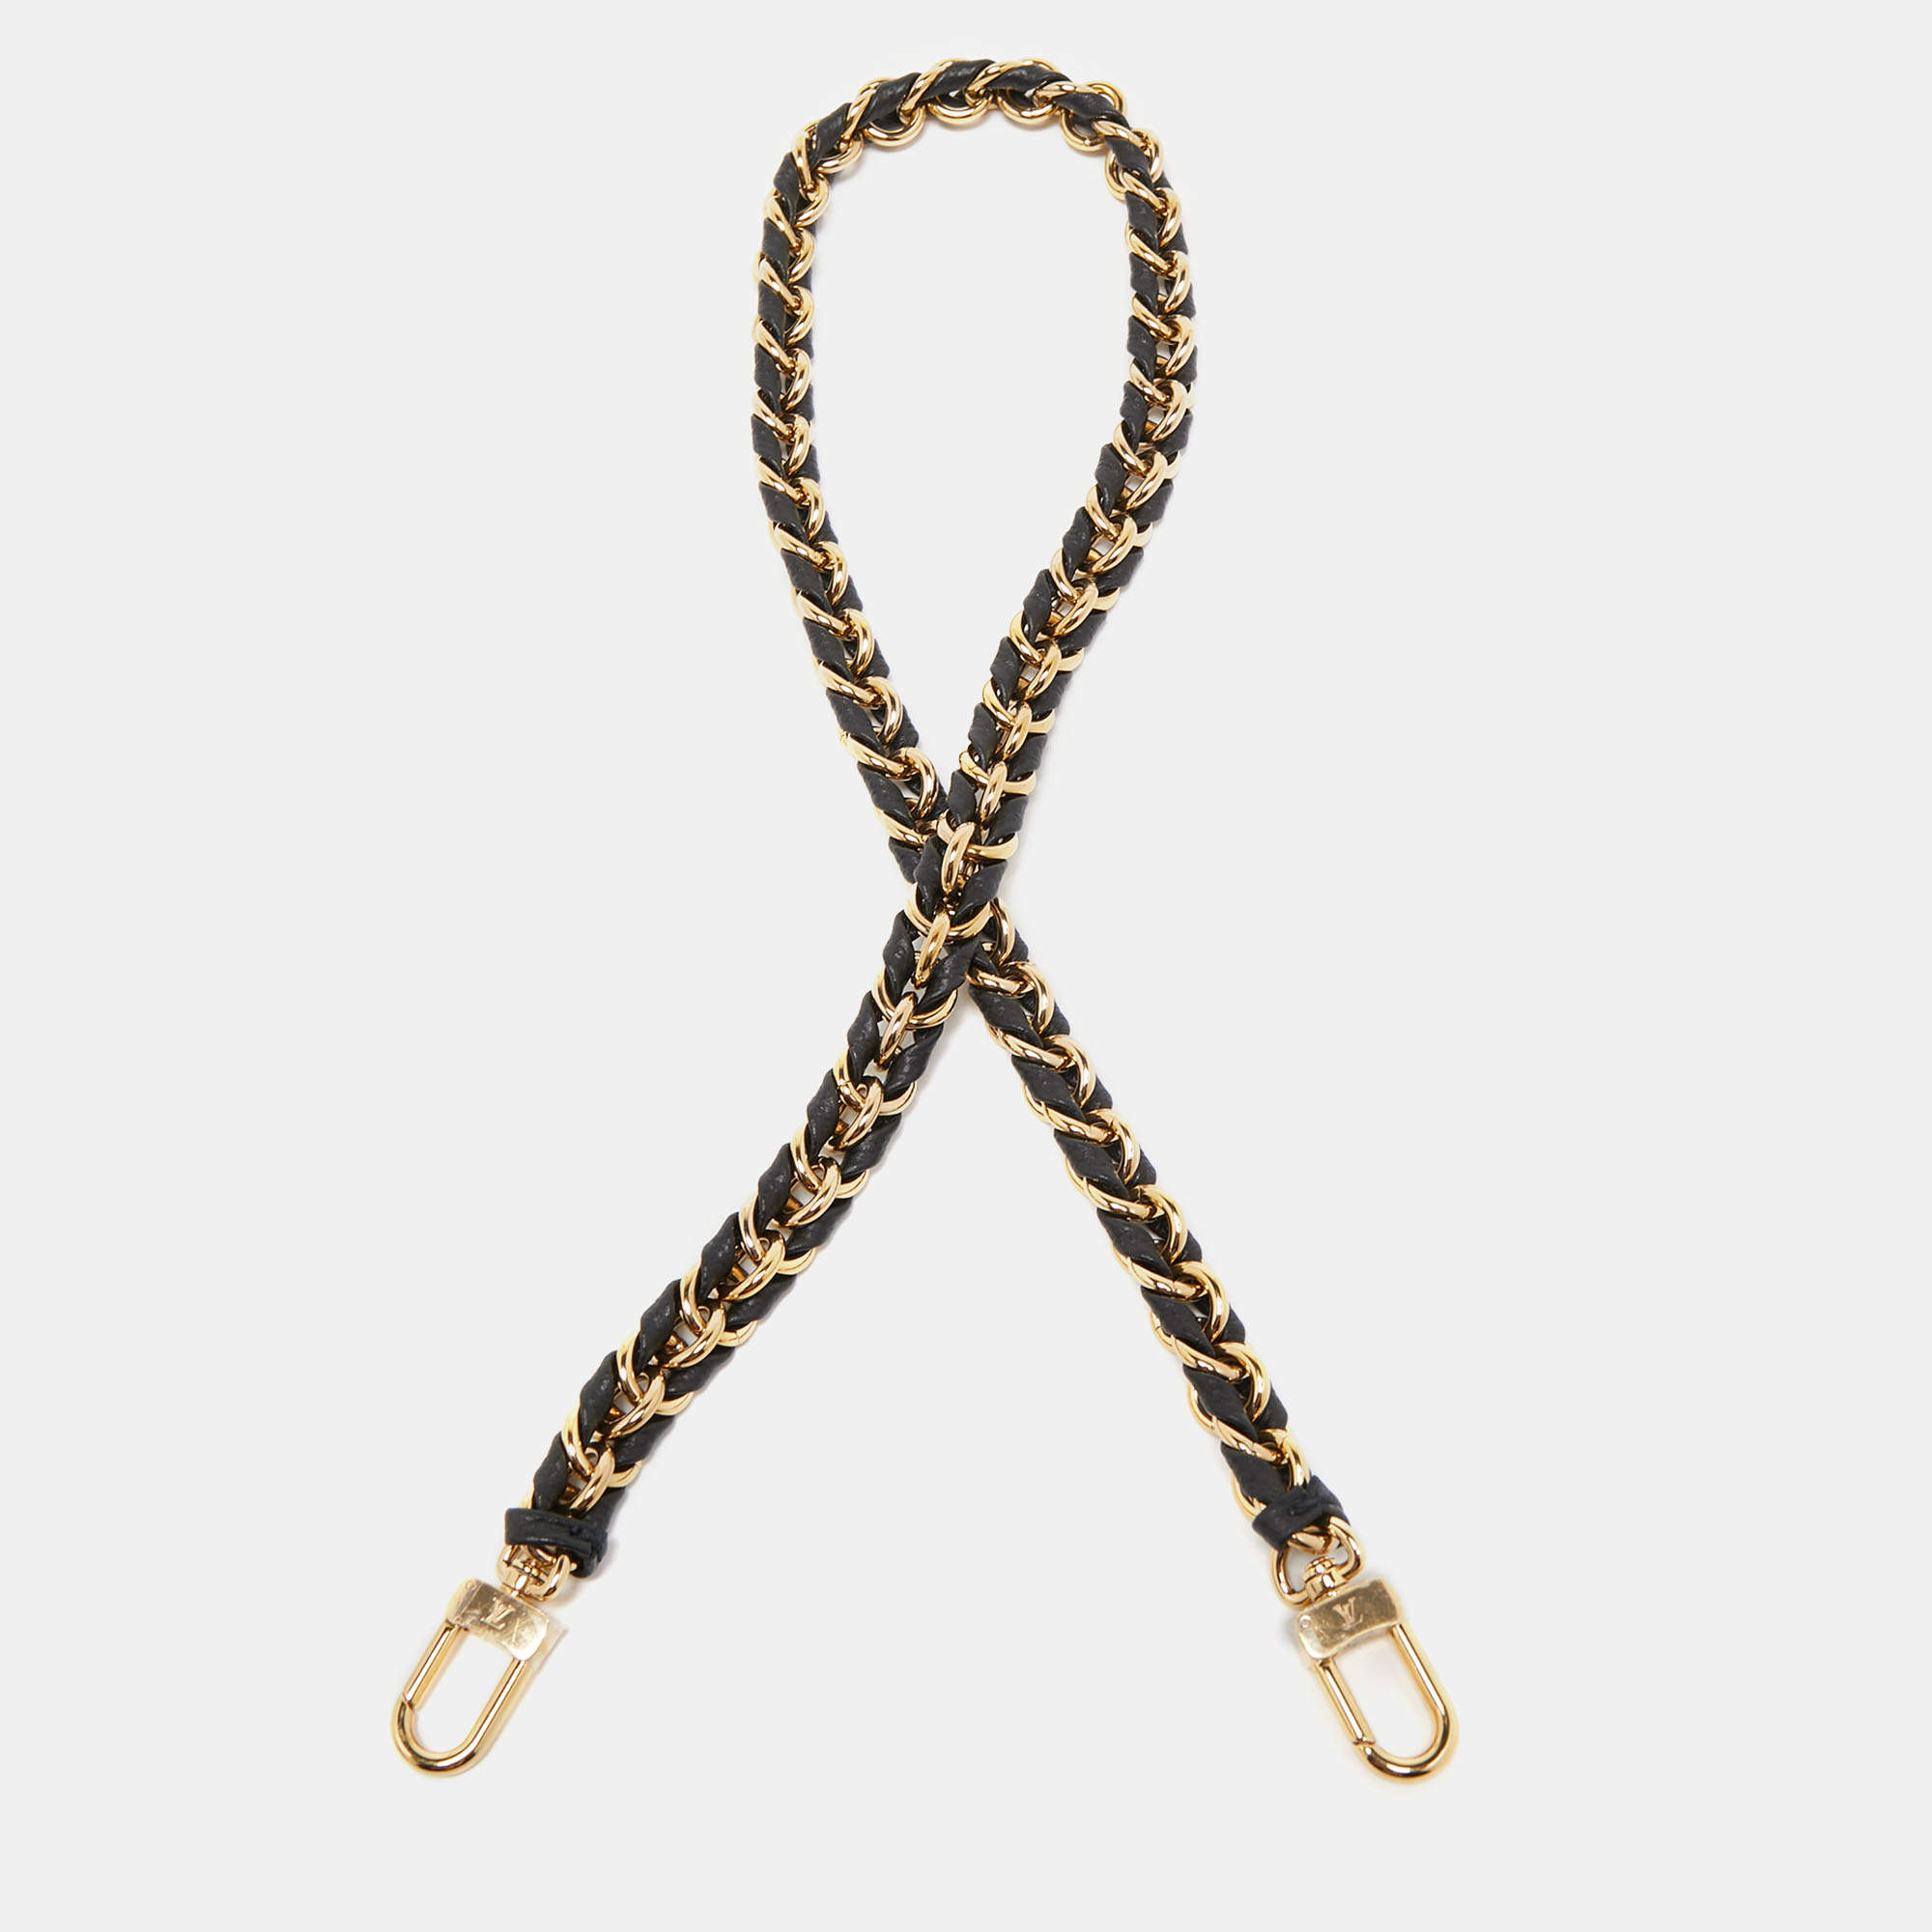 Did anyone get the Neverfull with the long braided strap last year